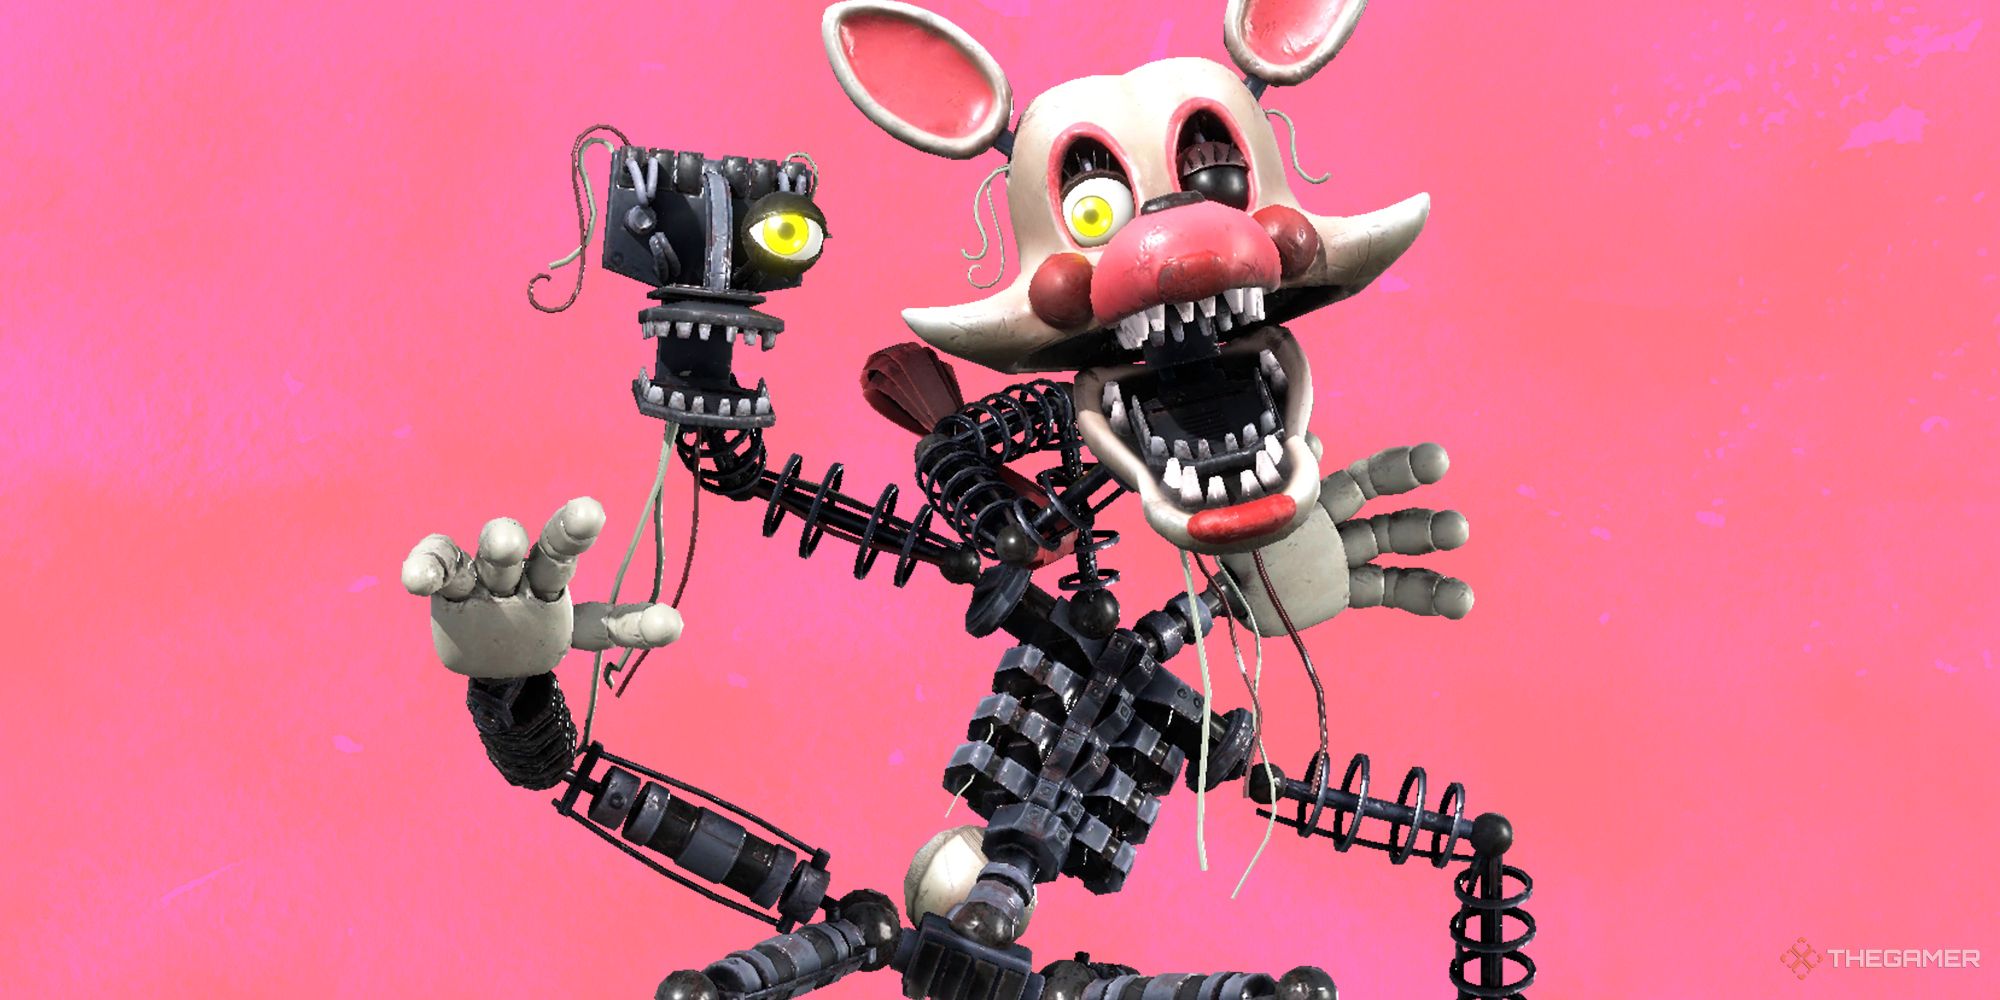 Five Nights at Freddy's Mangle over a pink background